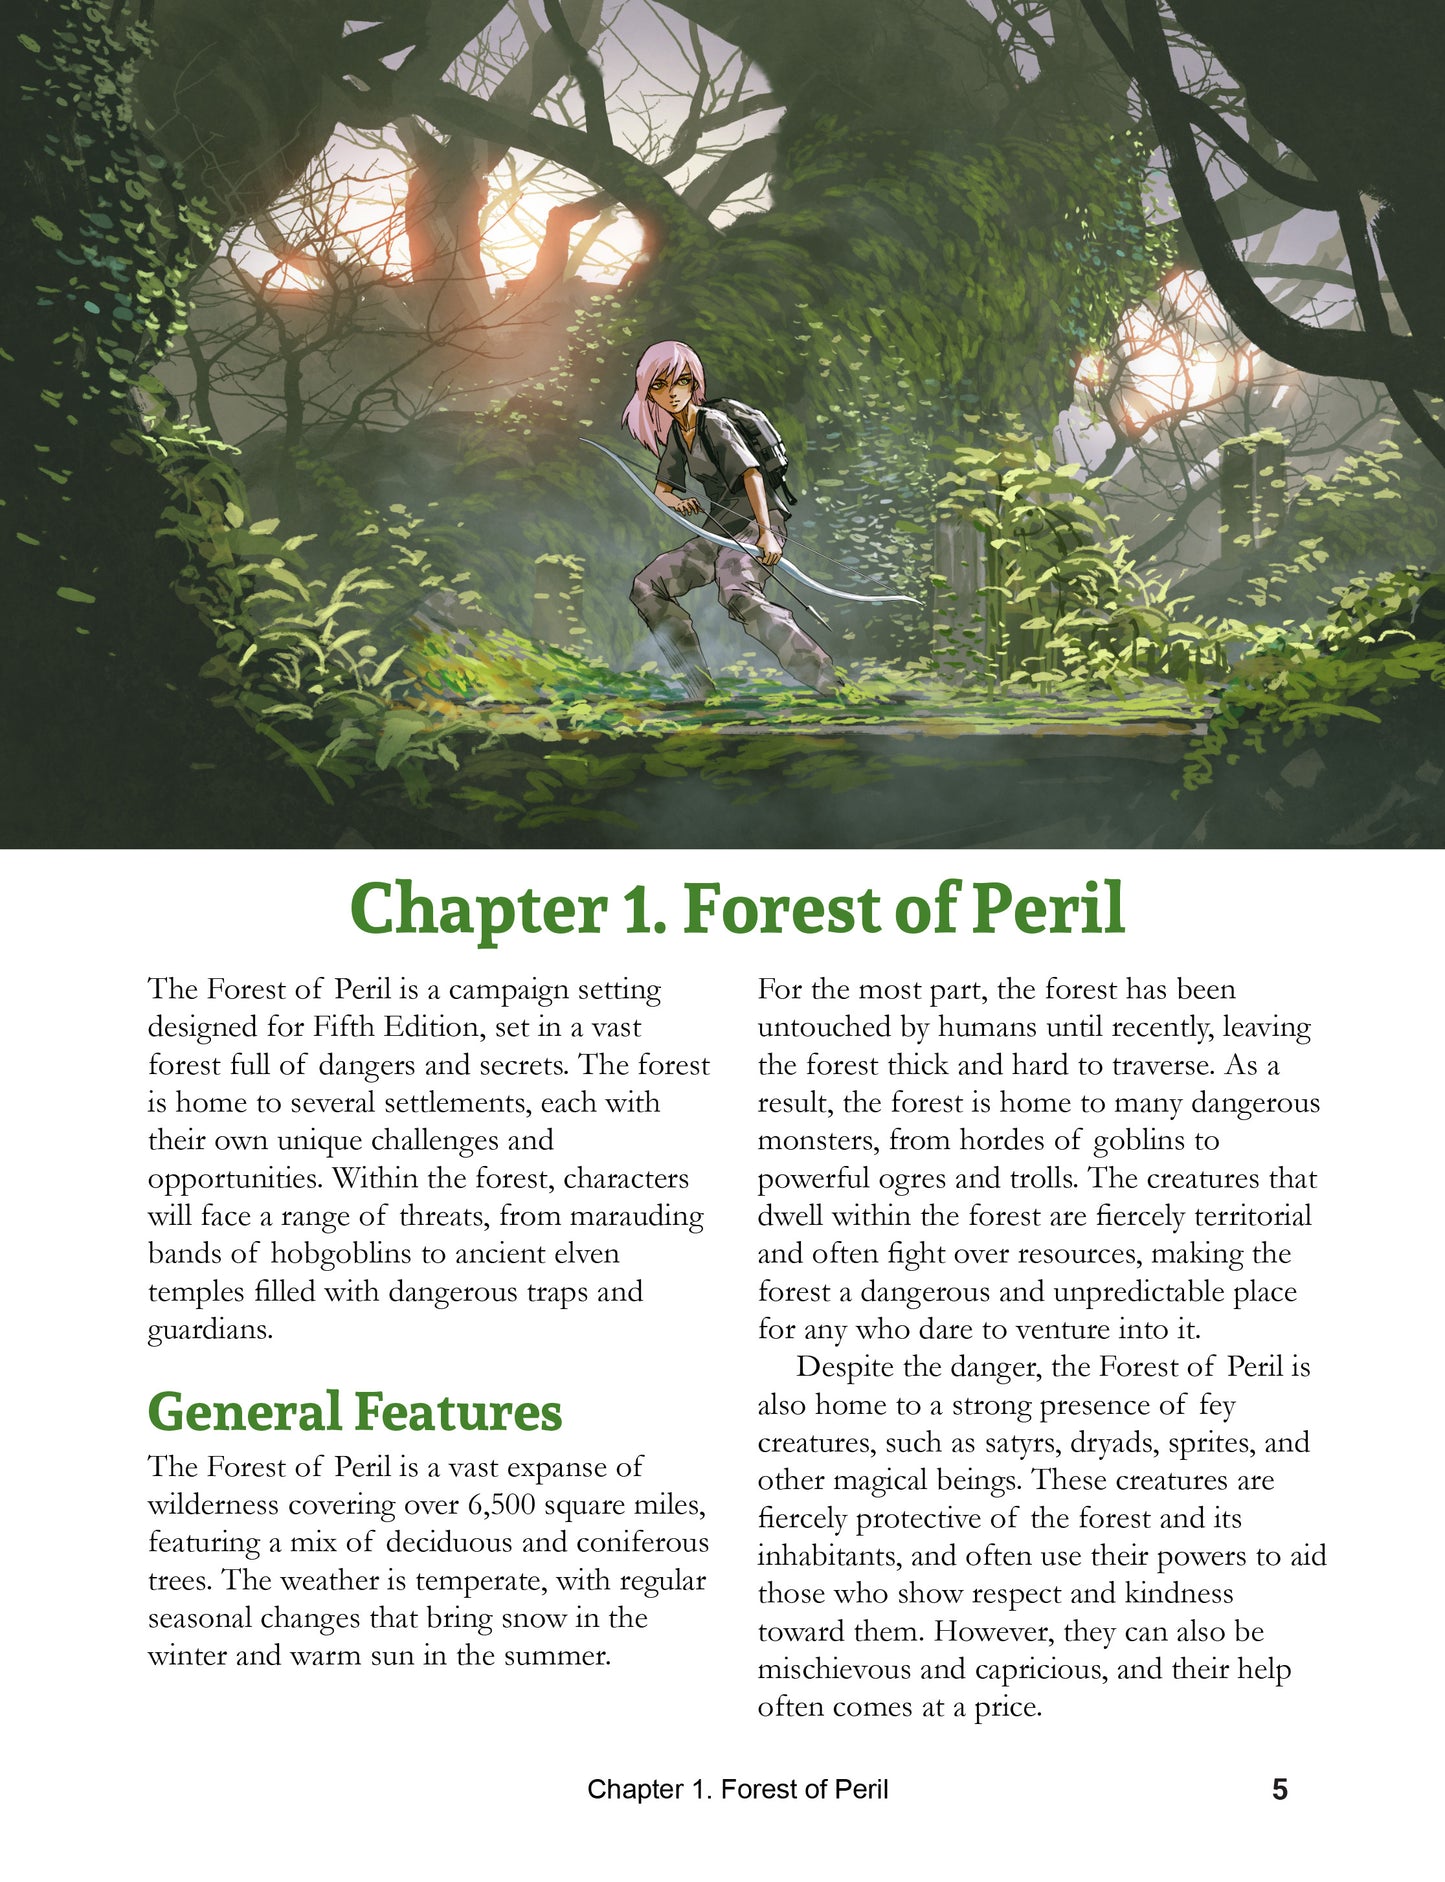 Dungeons & Lairs 1: Forest of Peril Softcover and PDF